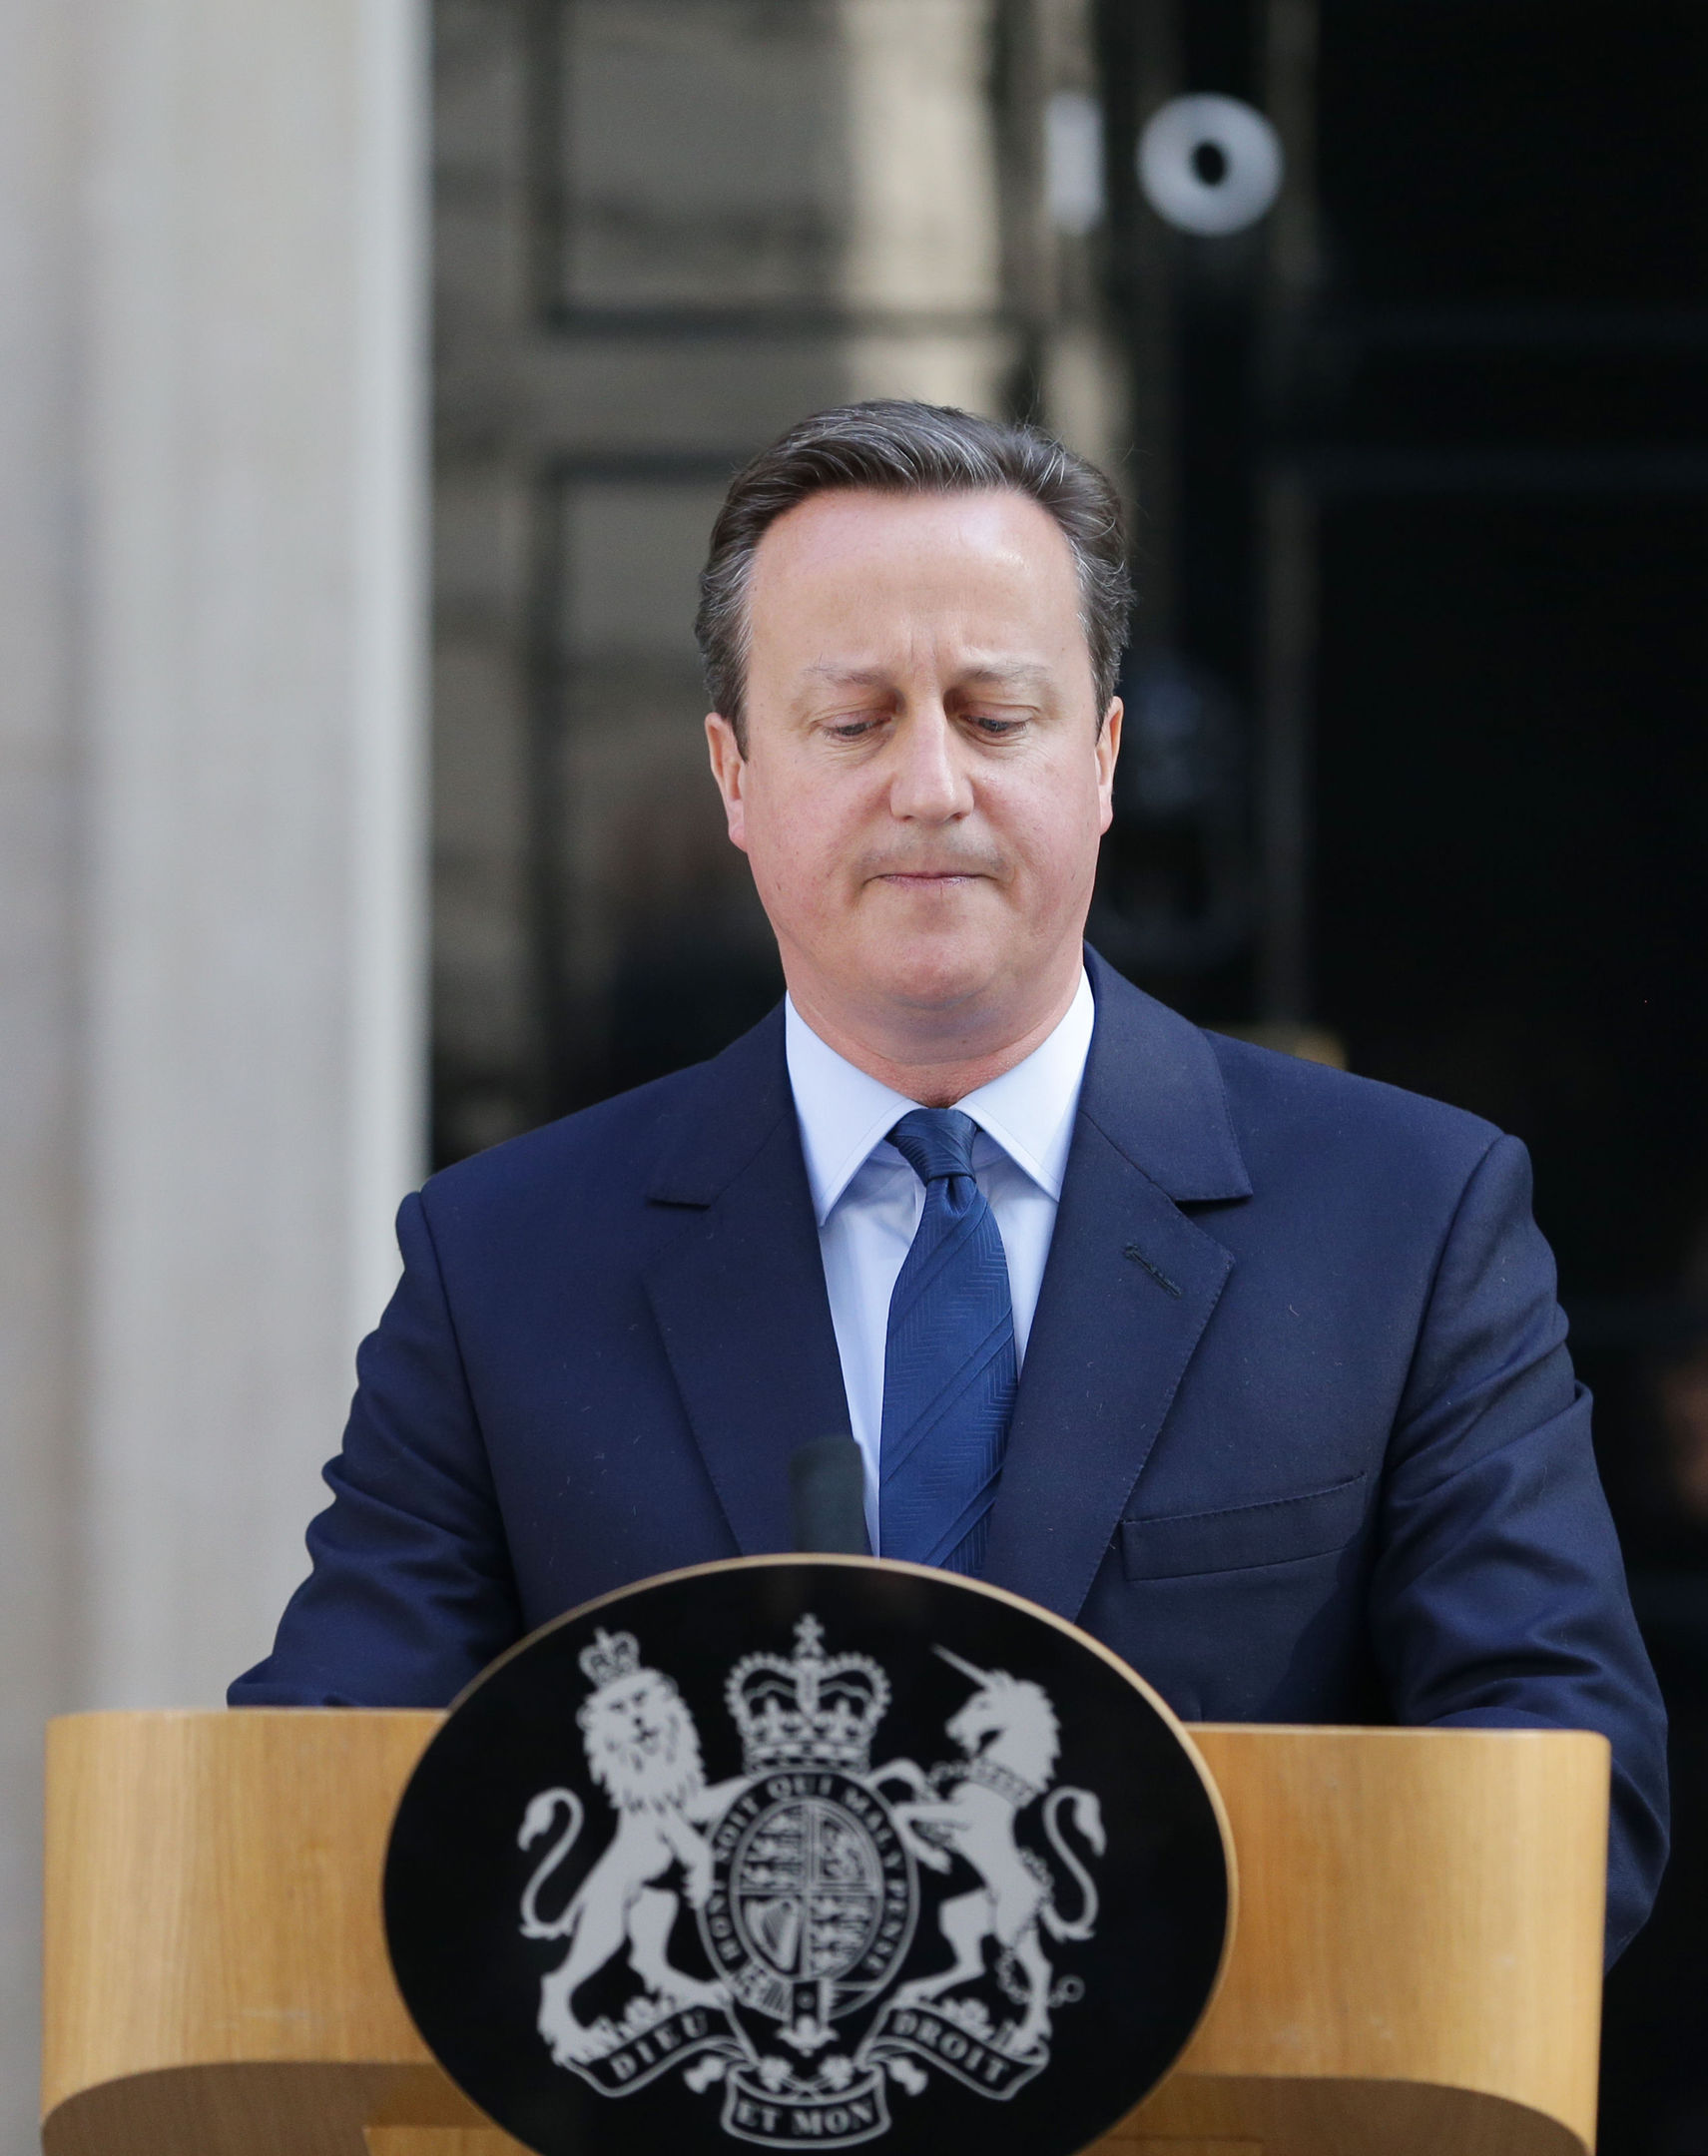 Prime Minister David Cameron confirms his resignation in a speech outside 10 Downing Street